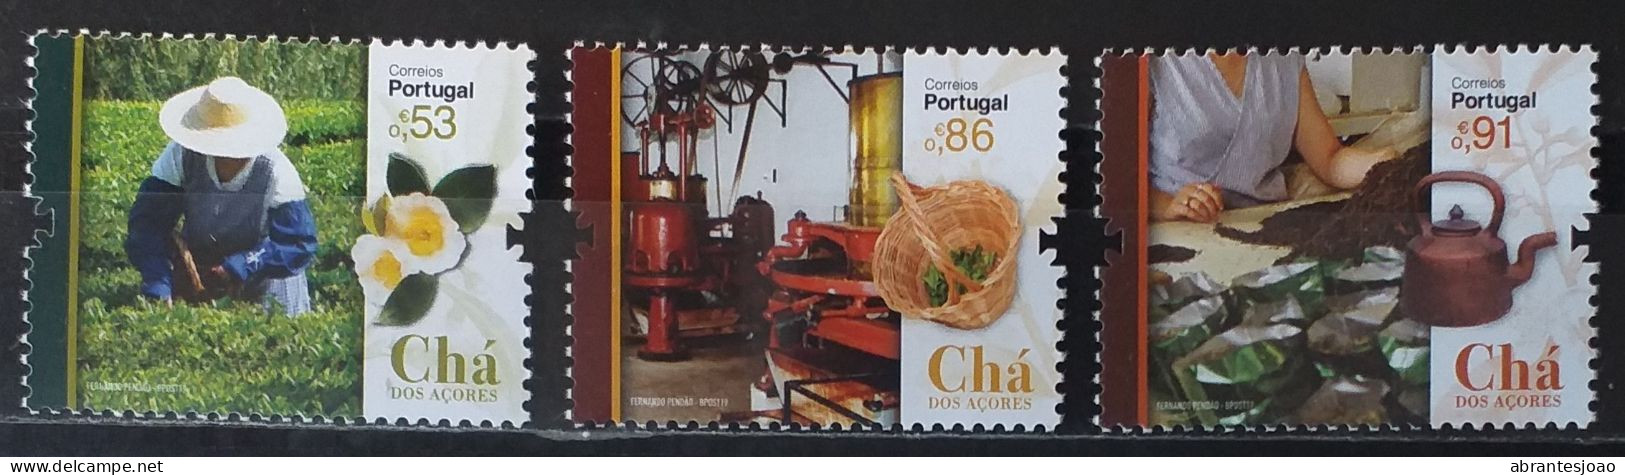 2019 - Portugal - MNH - The Tea From Azores - 3 Stamps - Ongebruikt